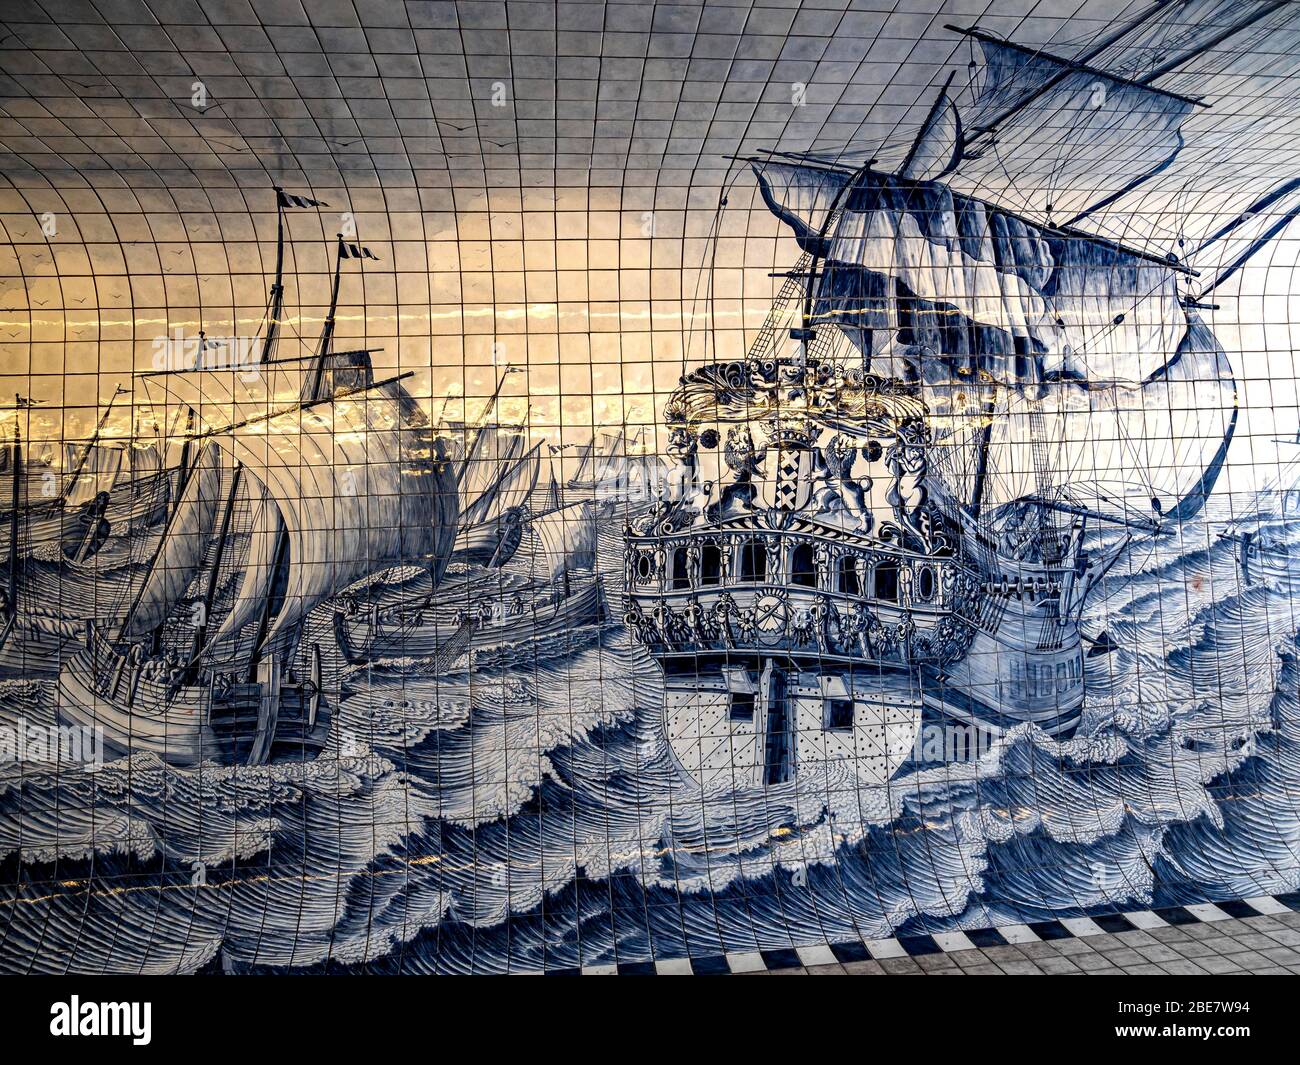 Historical sailing ships on stormy seas, motif on Delft tiles, Amsterdam, Netherlands Stock Photo